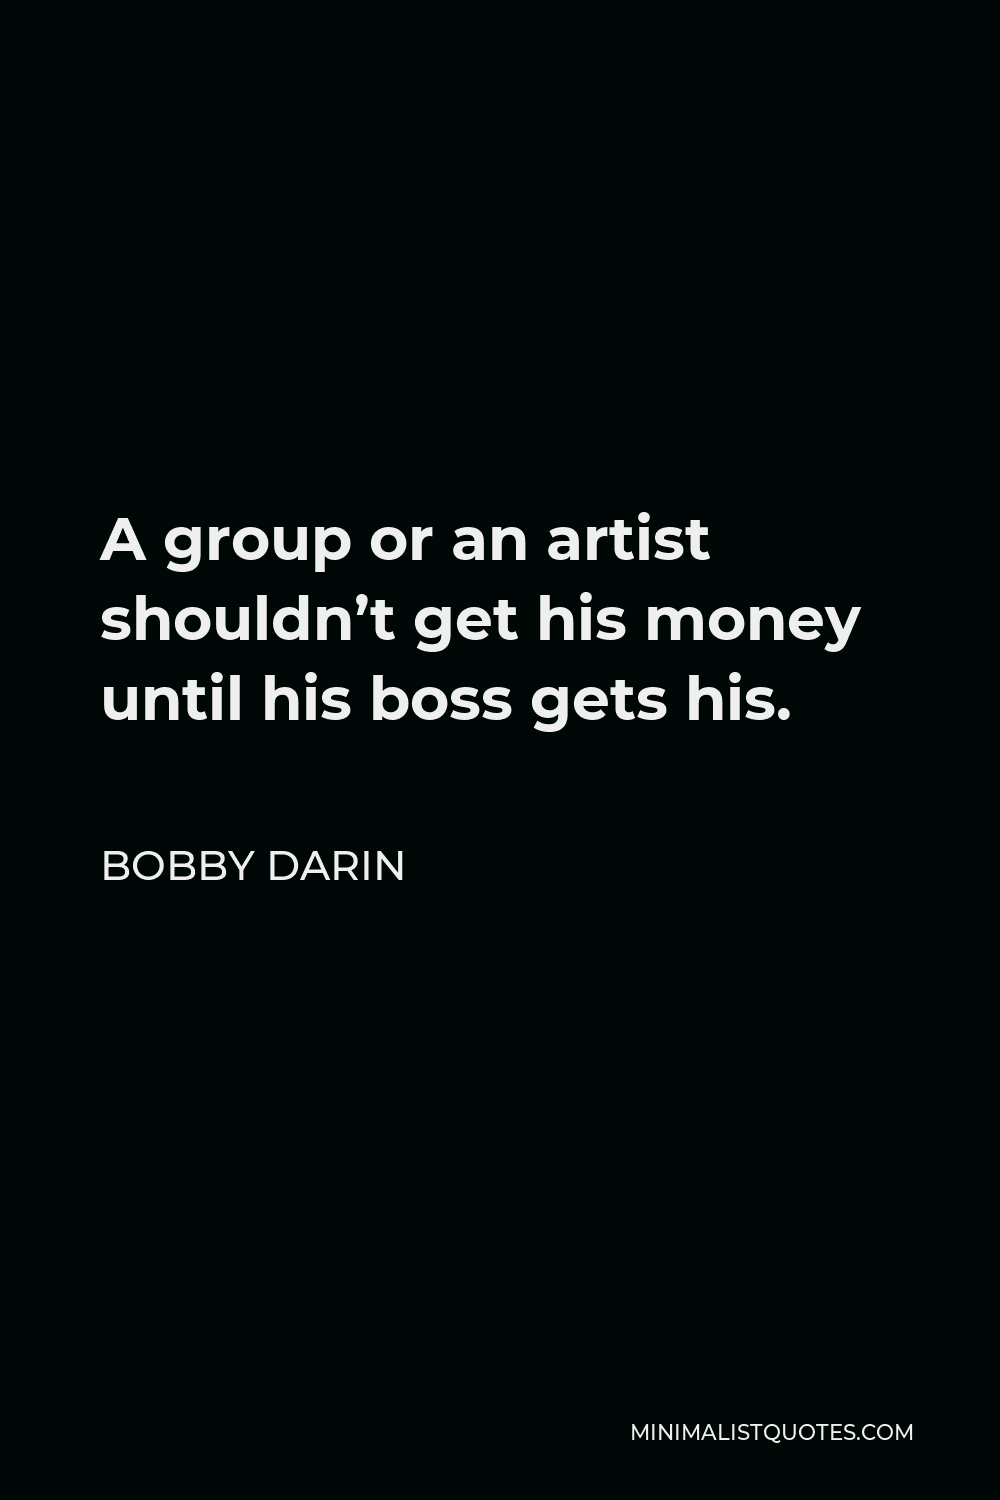 Bobby Darin Quote A Group Or An Artist Shouldn T Get His Money Until His Boss Gets His